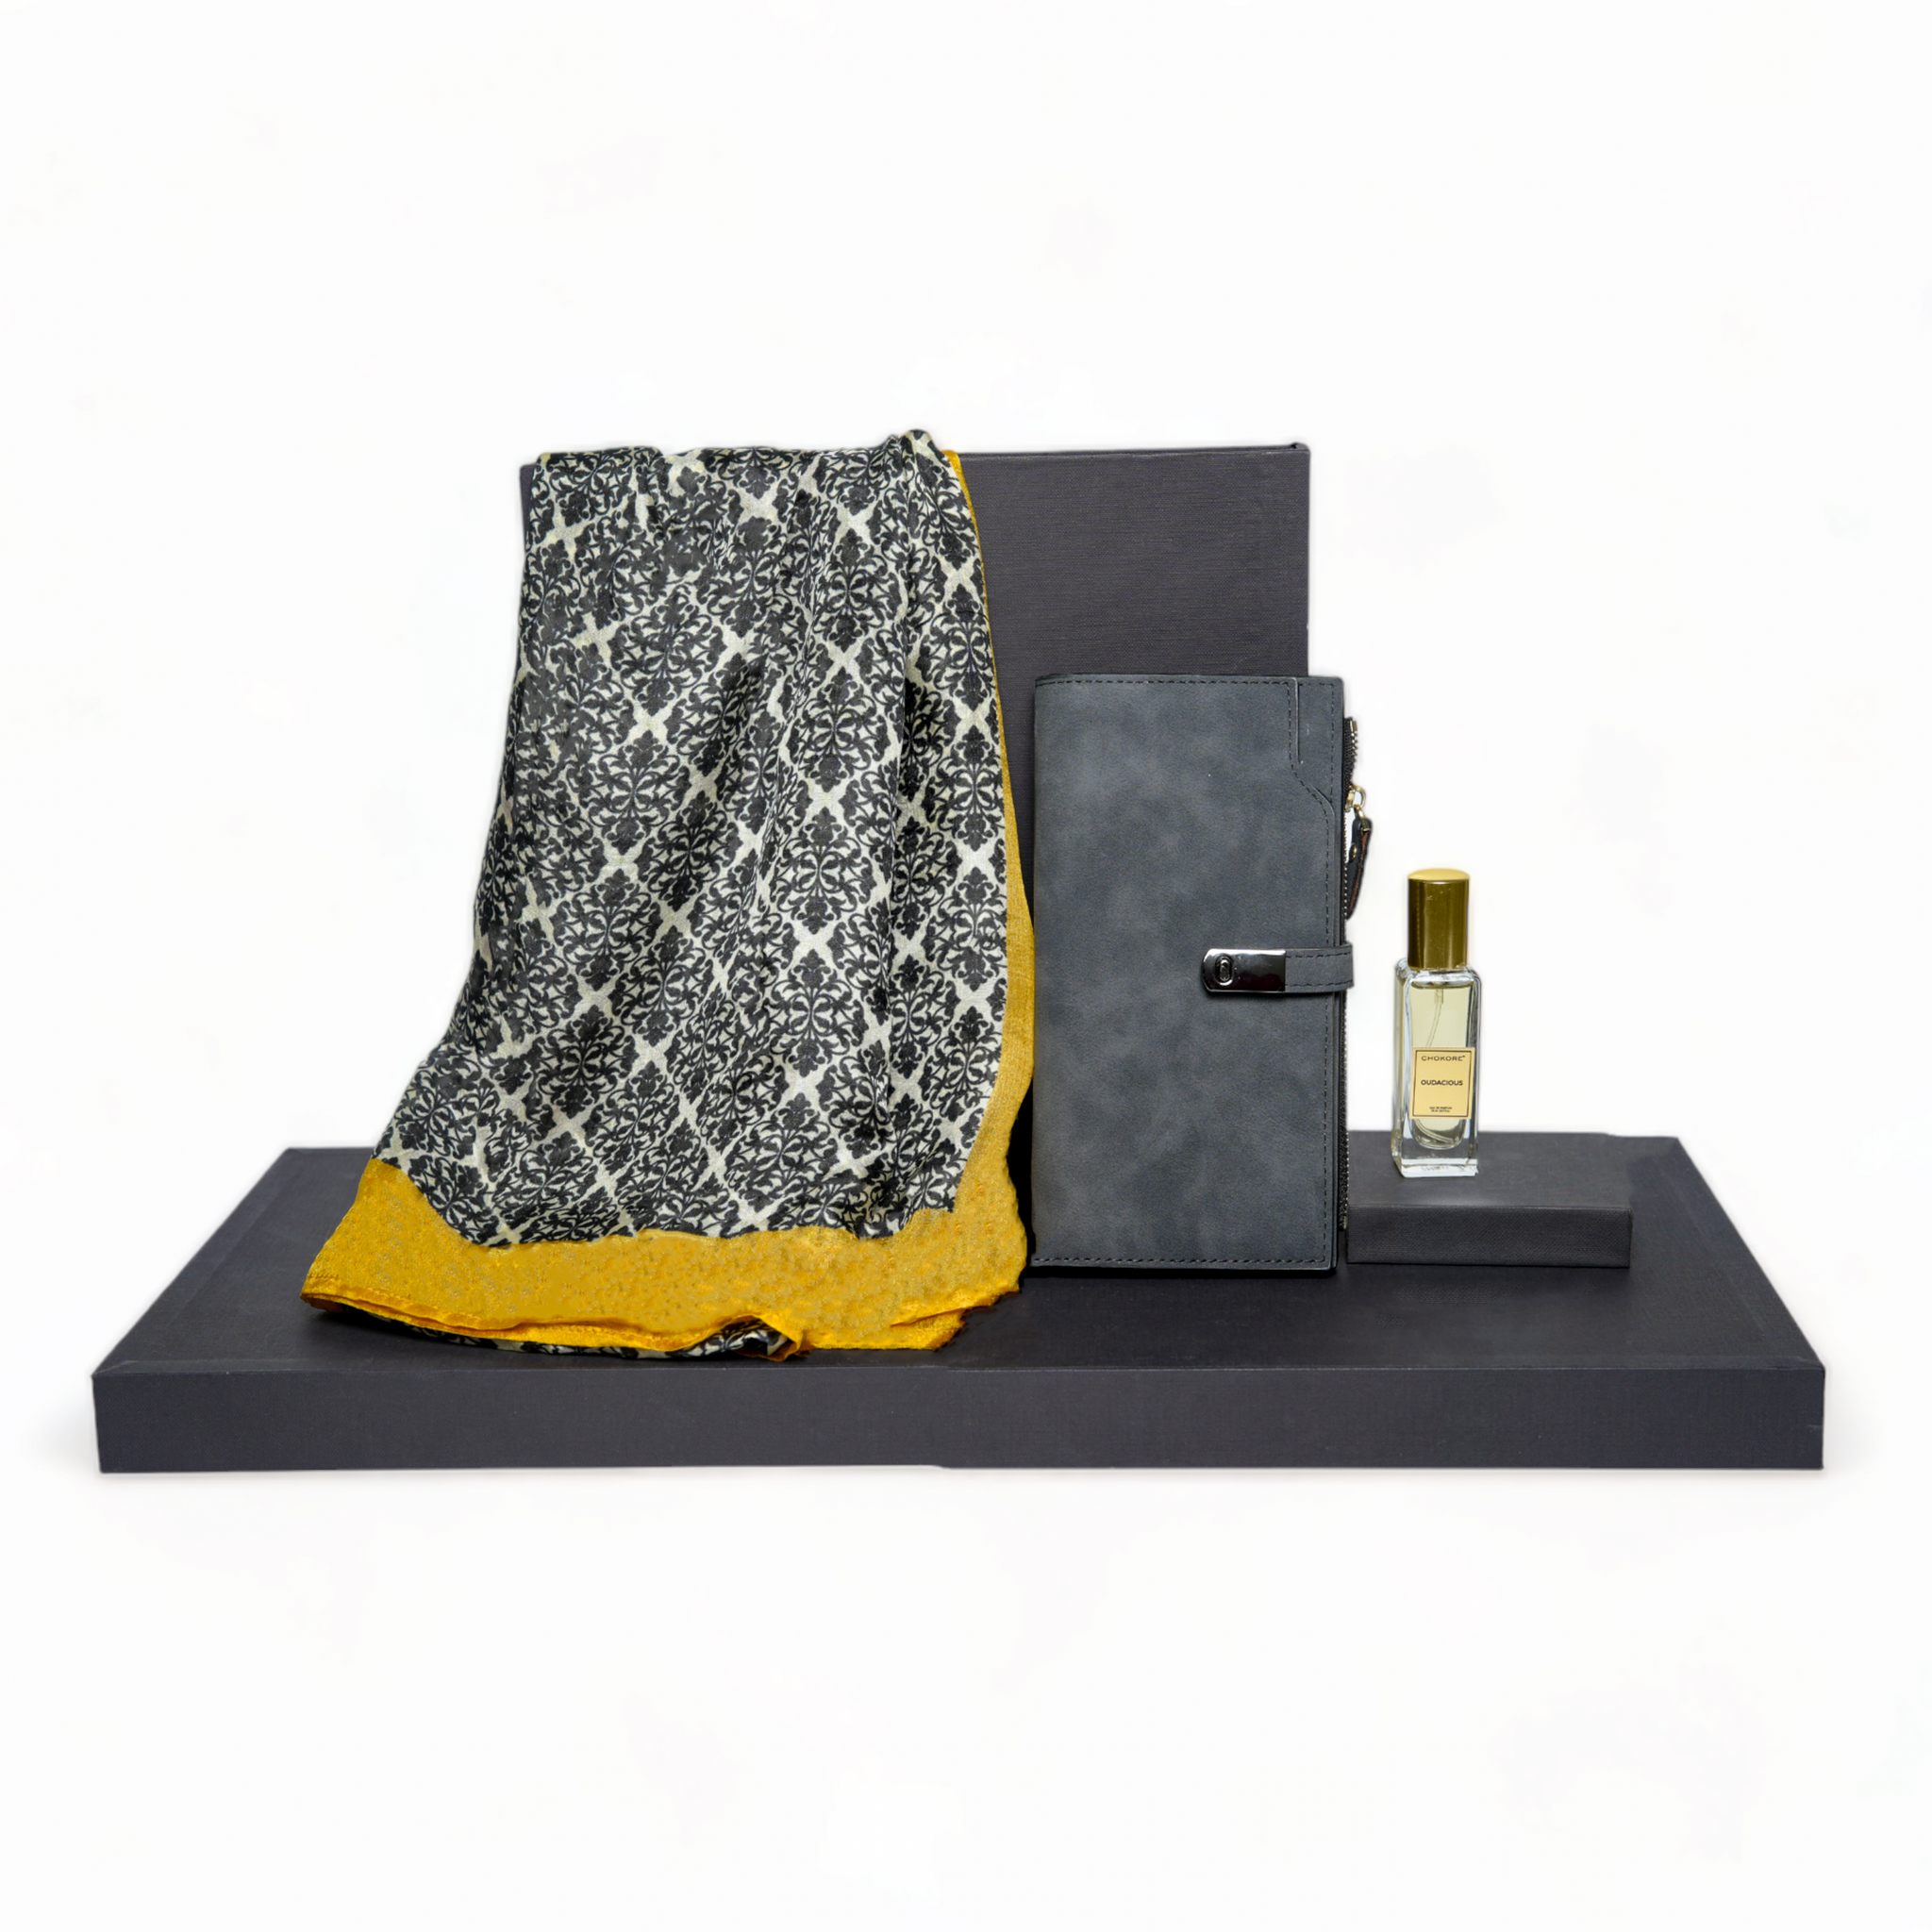 Chokore Special 3-in-1 Gift Set for Her (Silk Stole, Wallet, & Perfume, 20 ml)